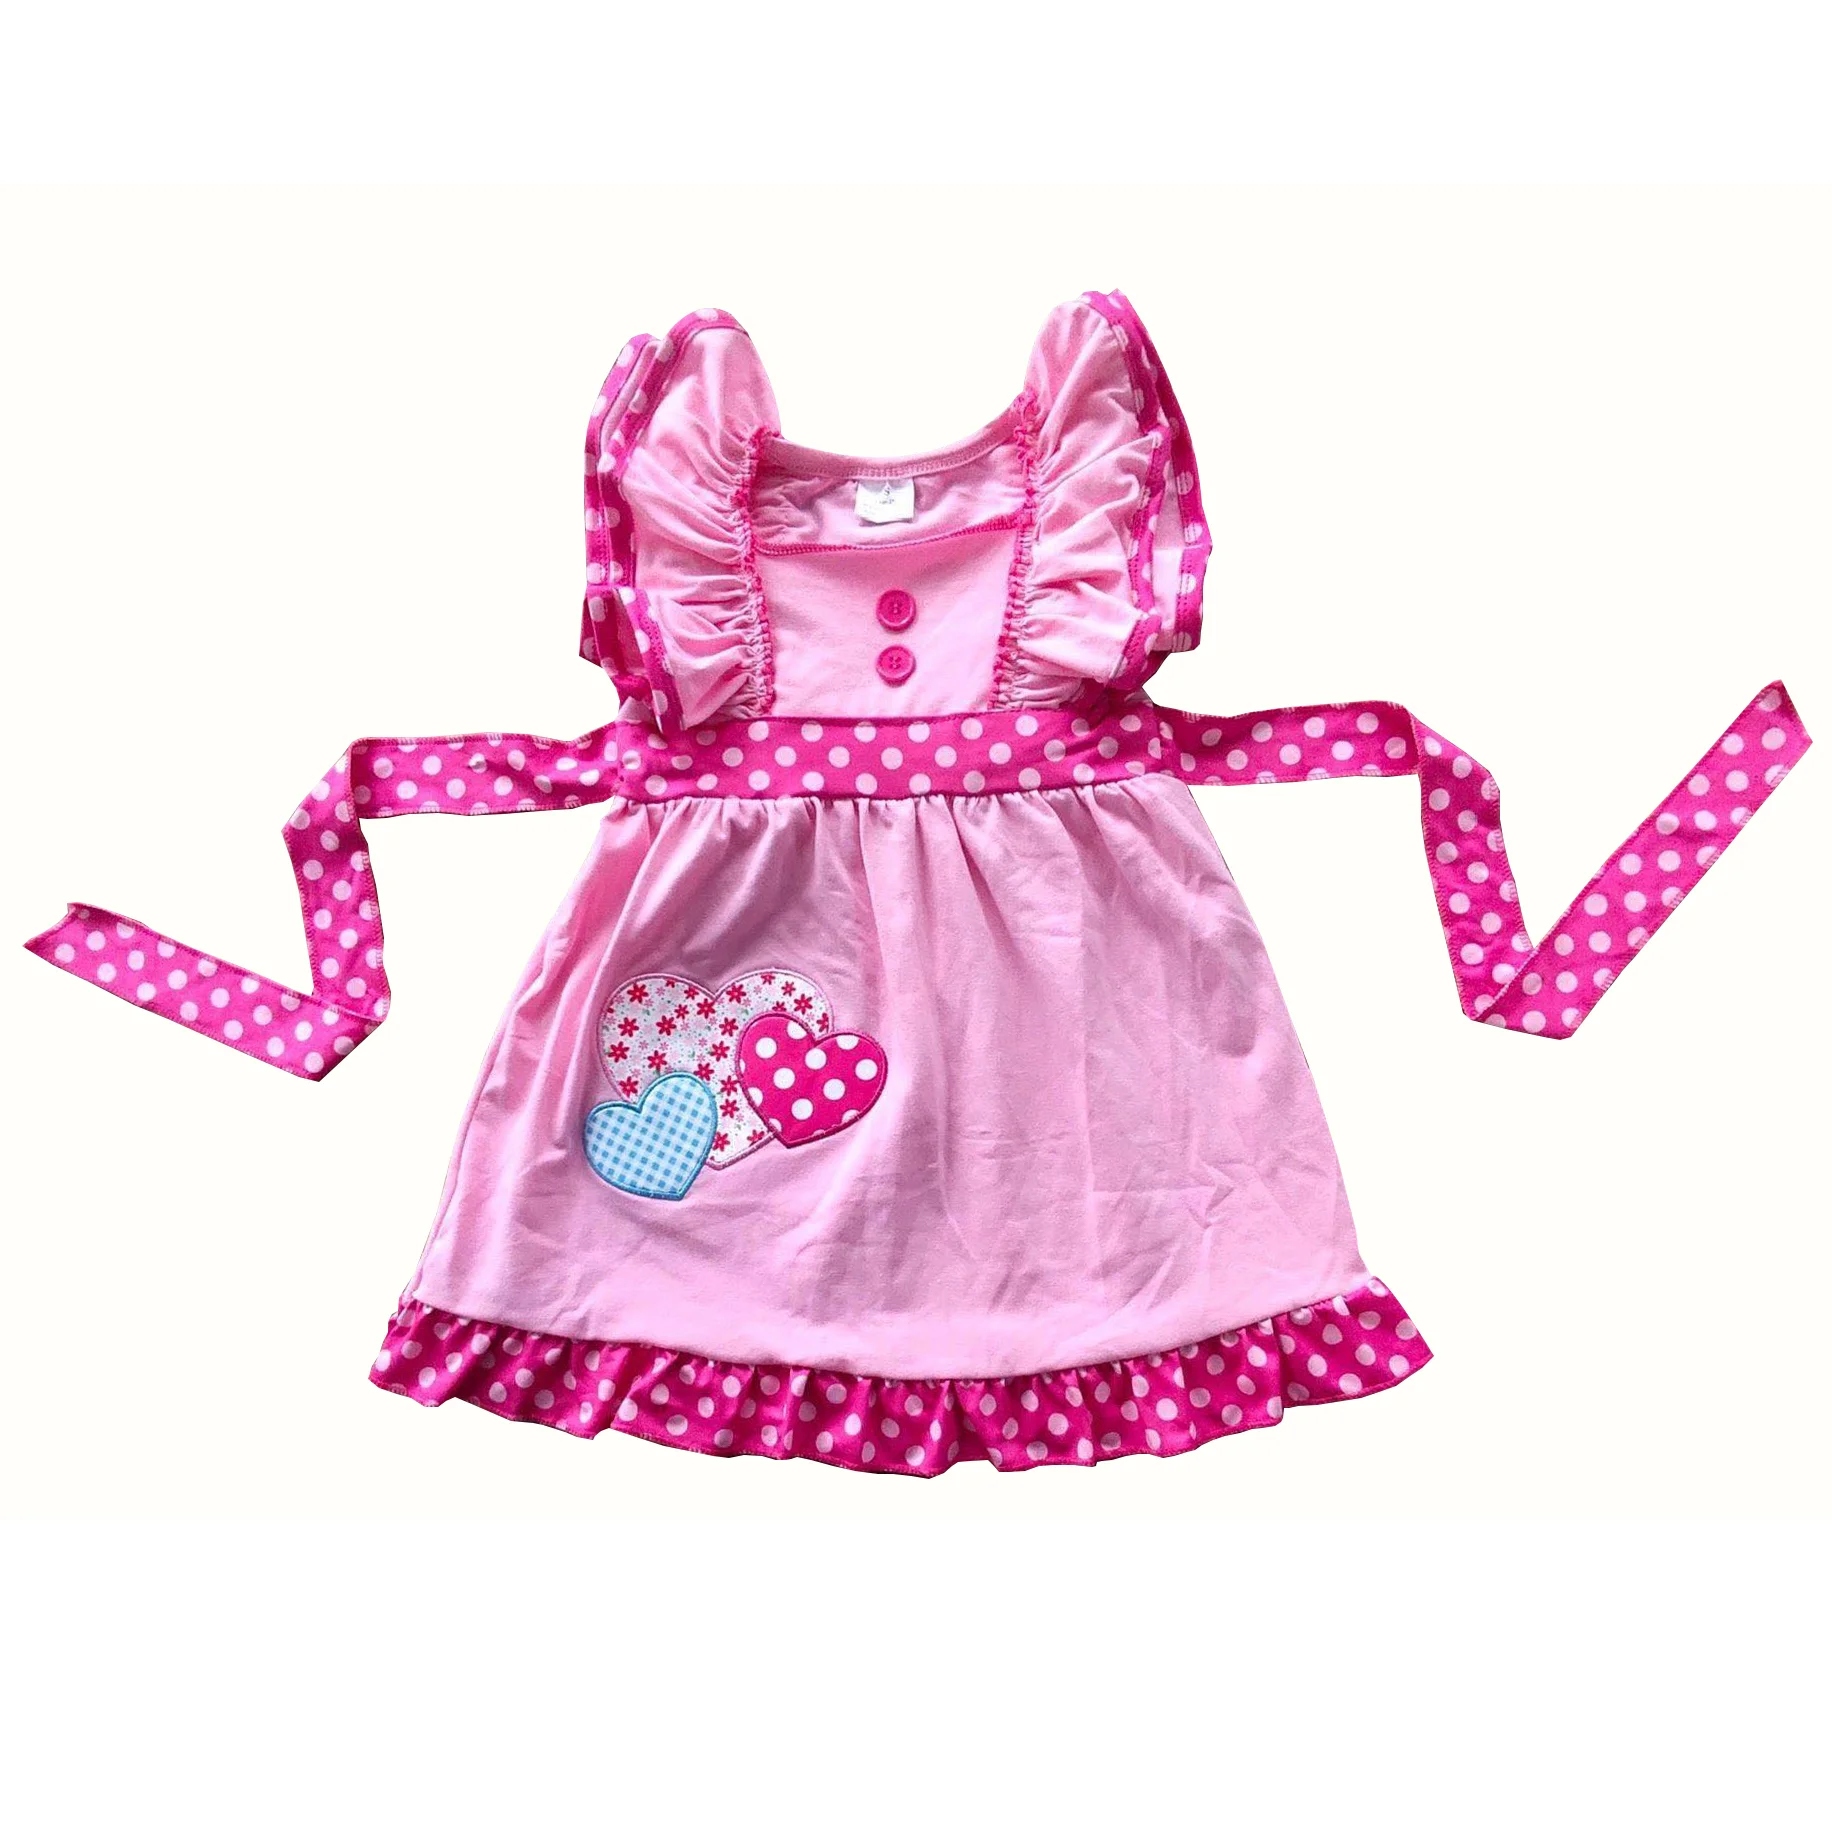 Spring Baby Girl Sleeveless Pink Cotton Dress with Applique Hearts Polka Ruffles Kids Boutique Clothing Wholesale